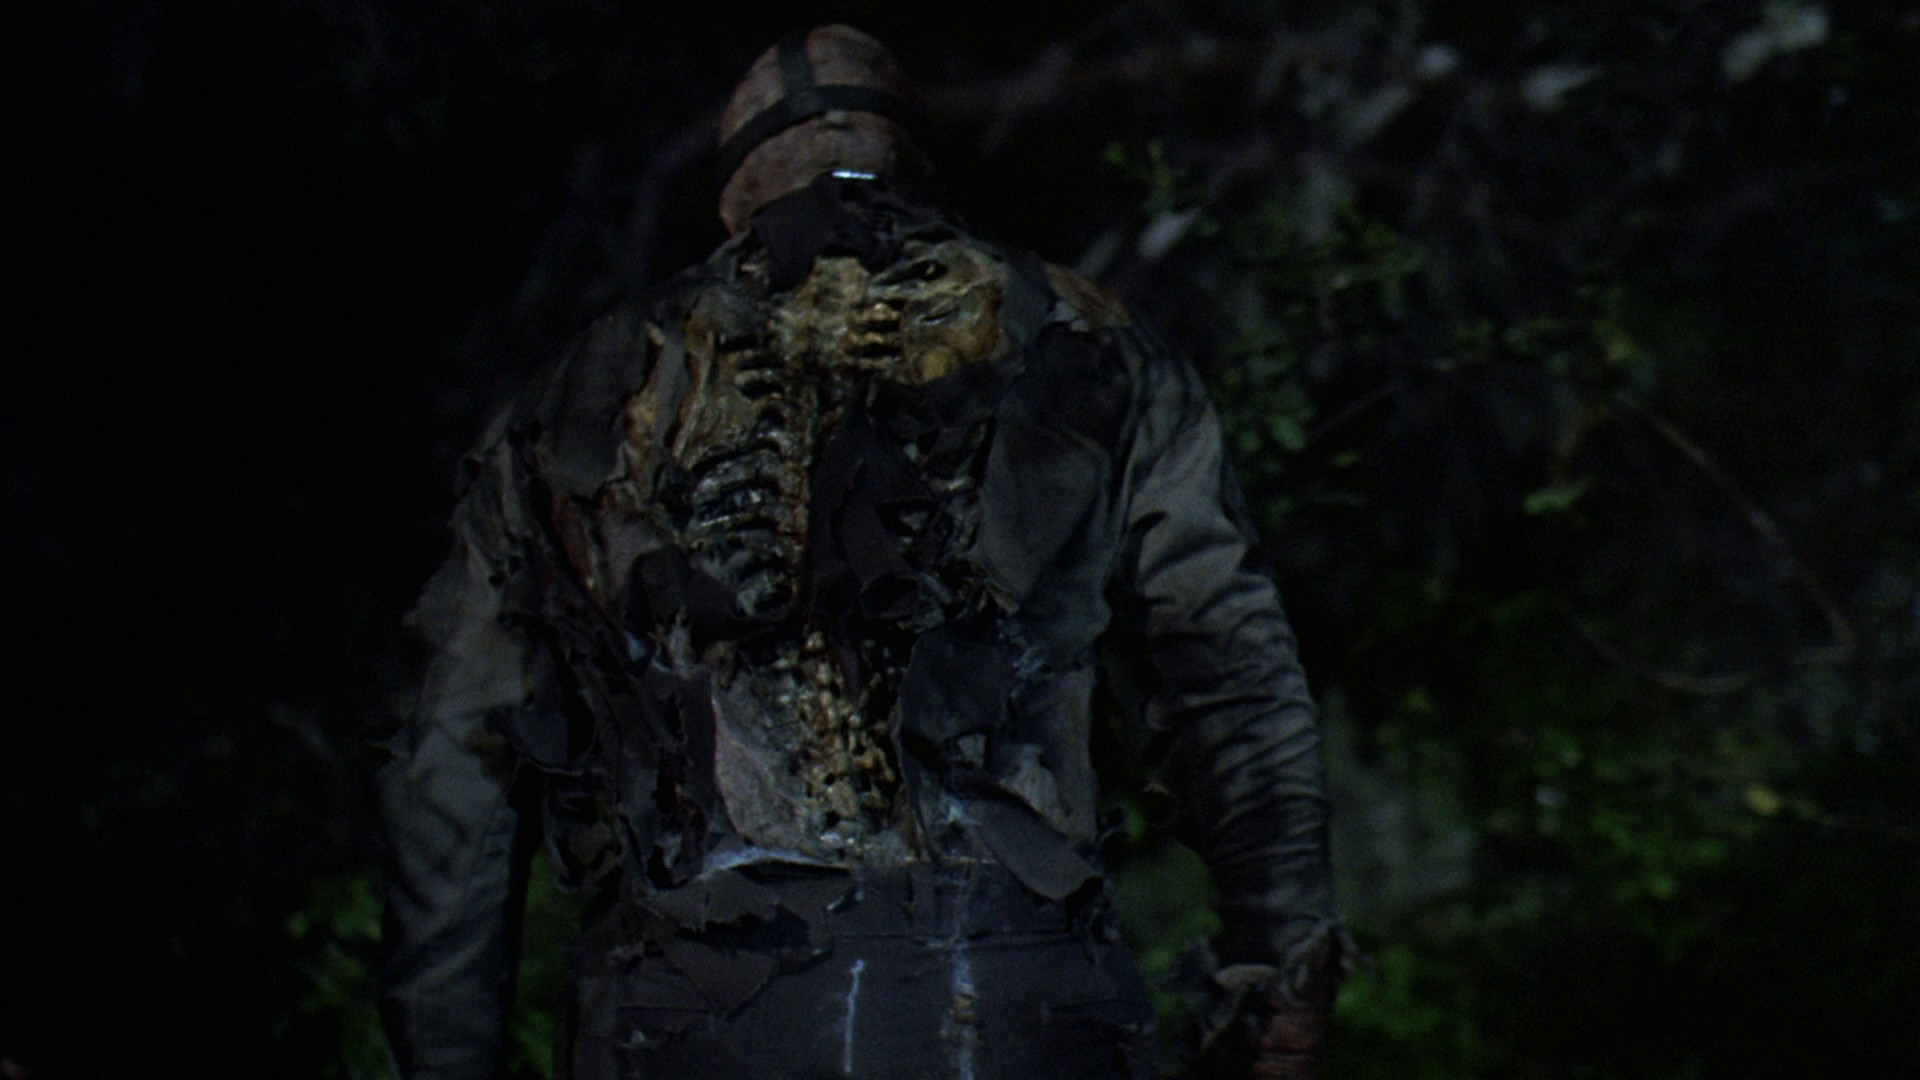 Friday The 13th Part VII: The New Blood pic 2